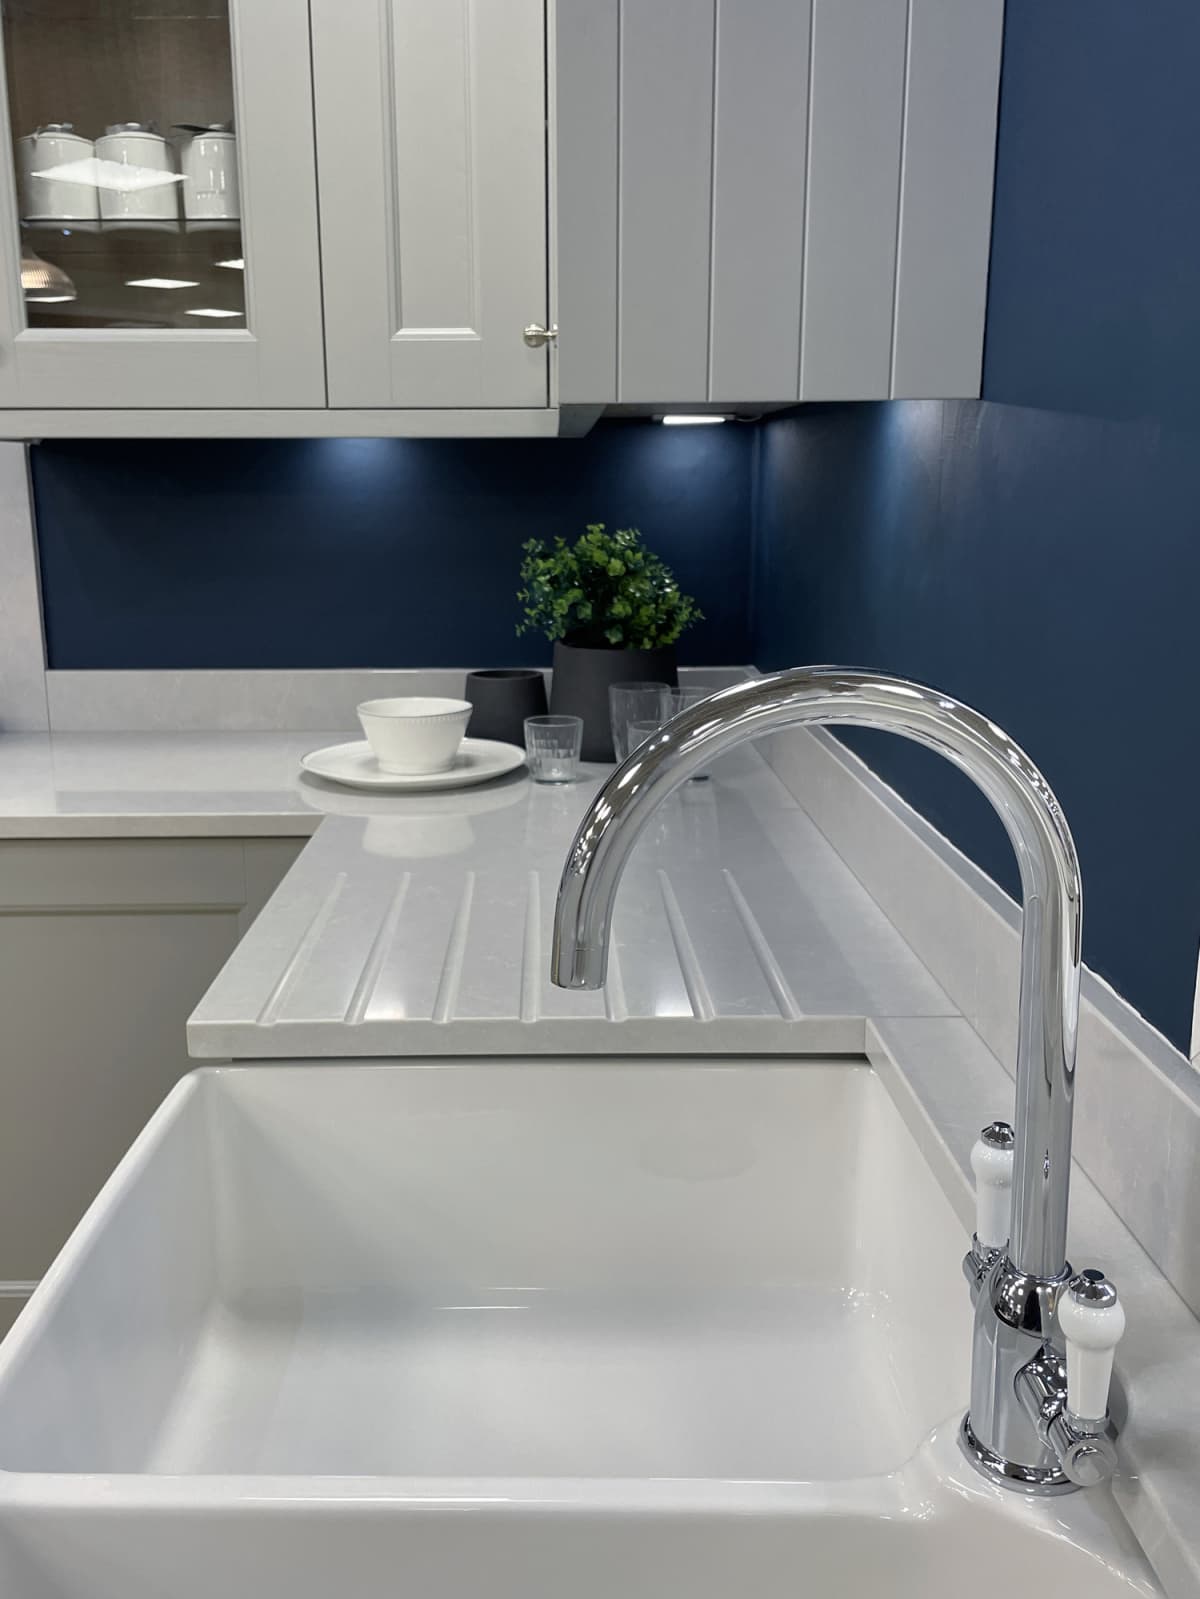 A sink in a blue colored kitchen